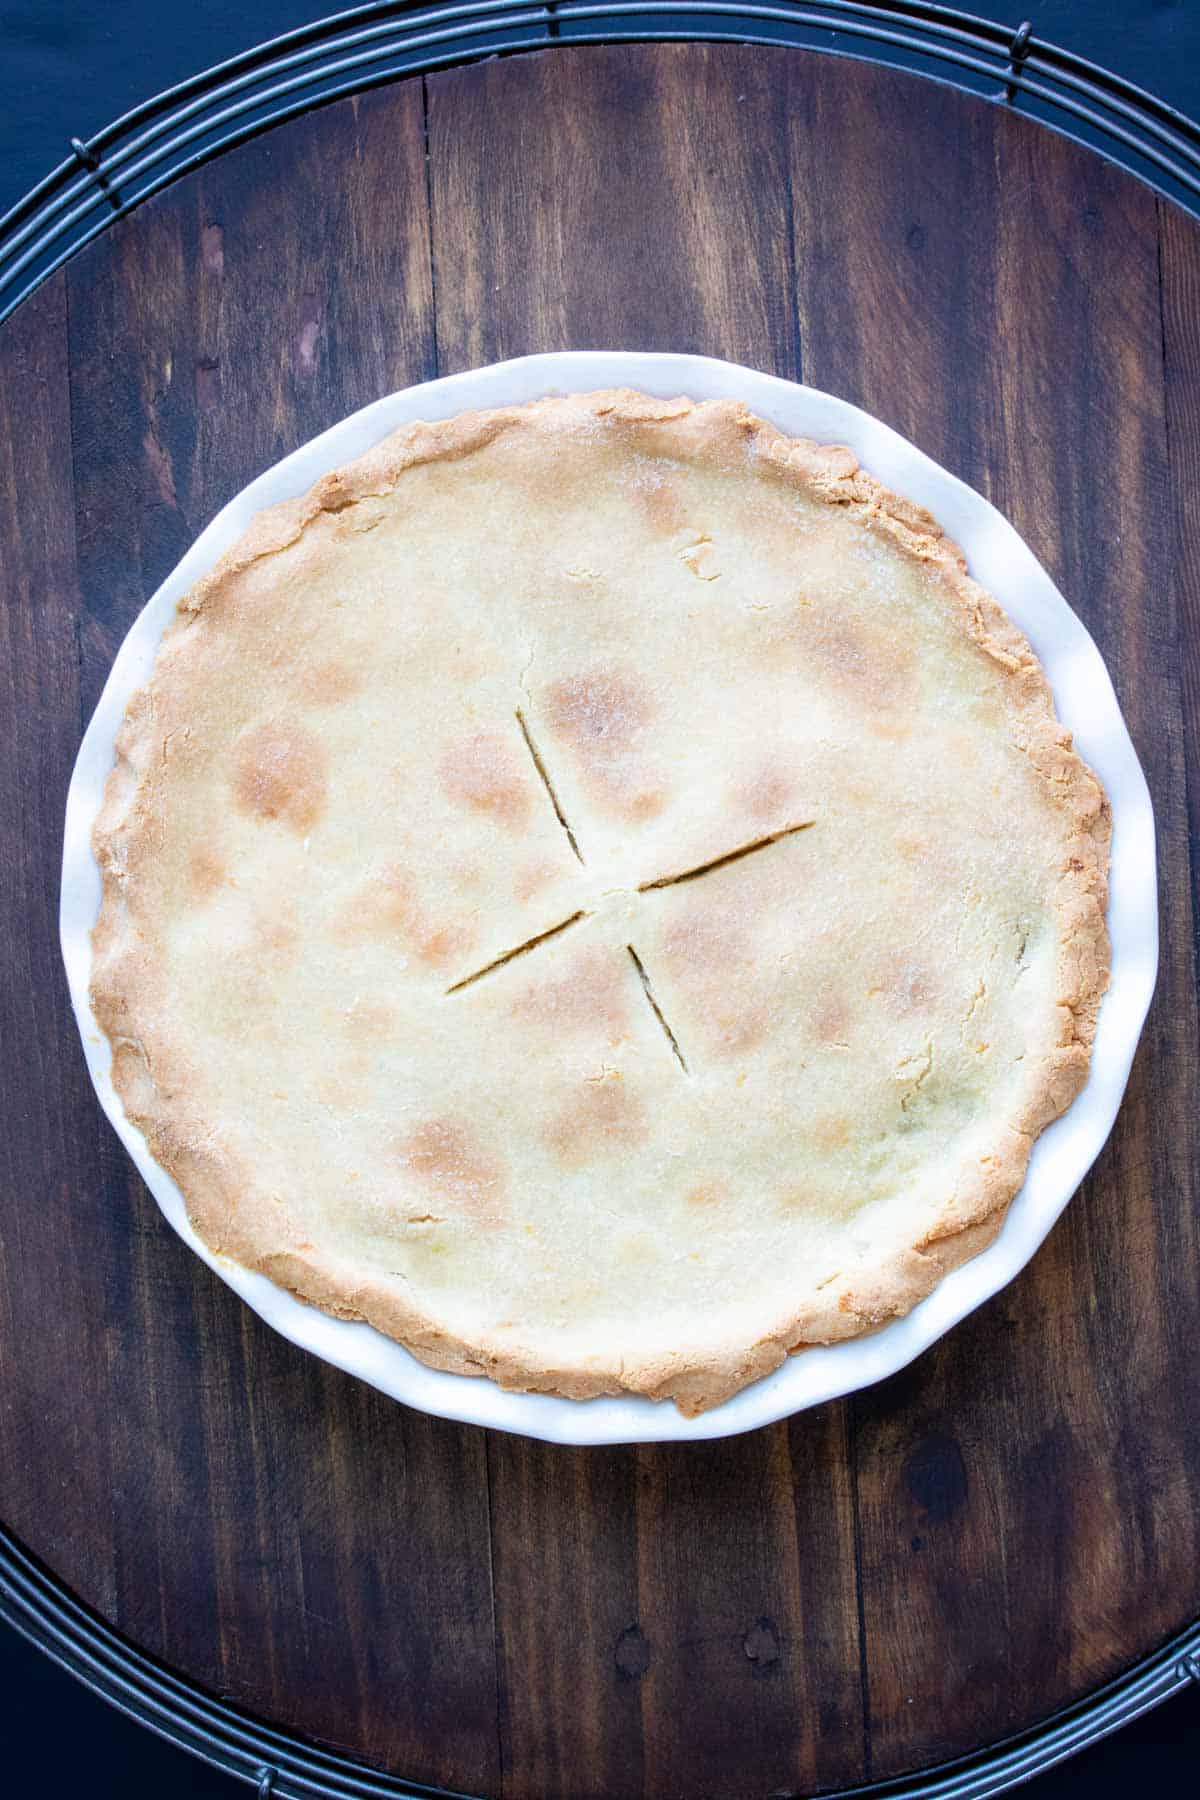 Top view of a baked vegetable pot pie on a wooden surface